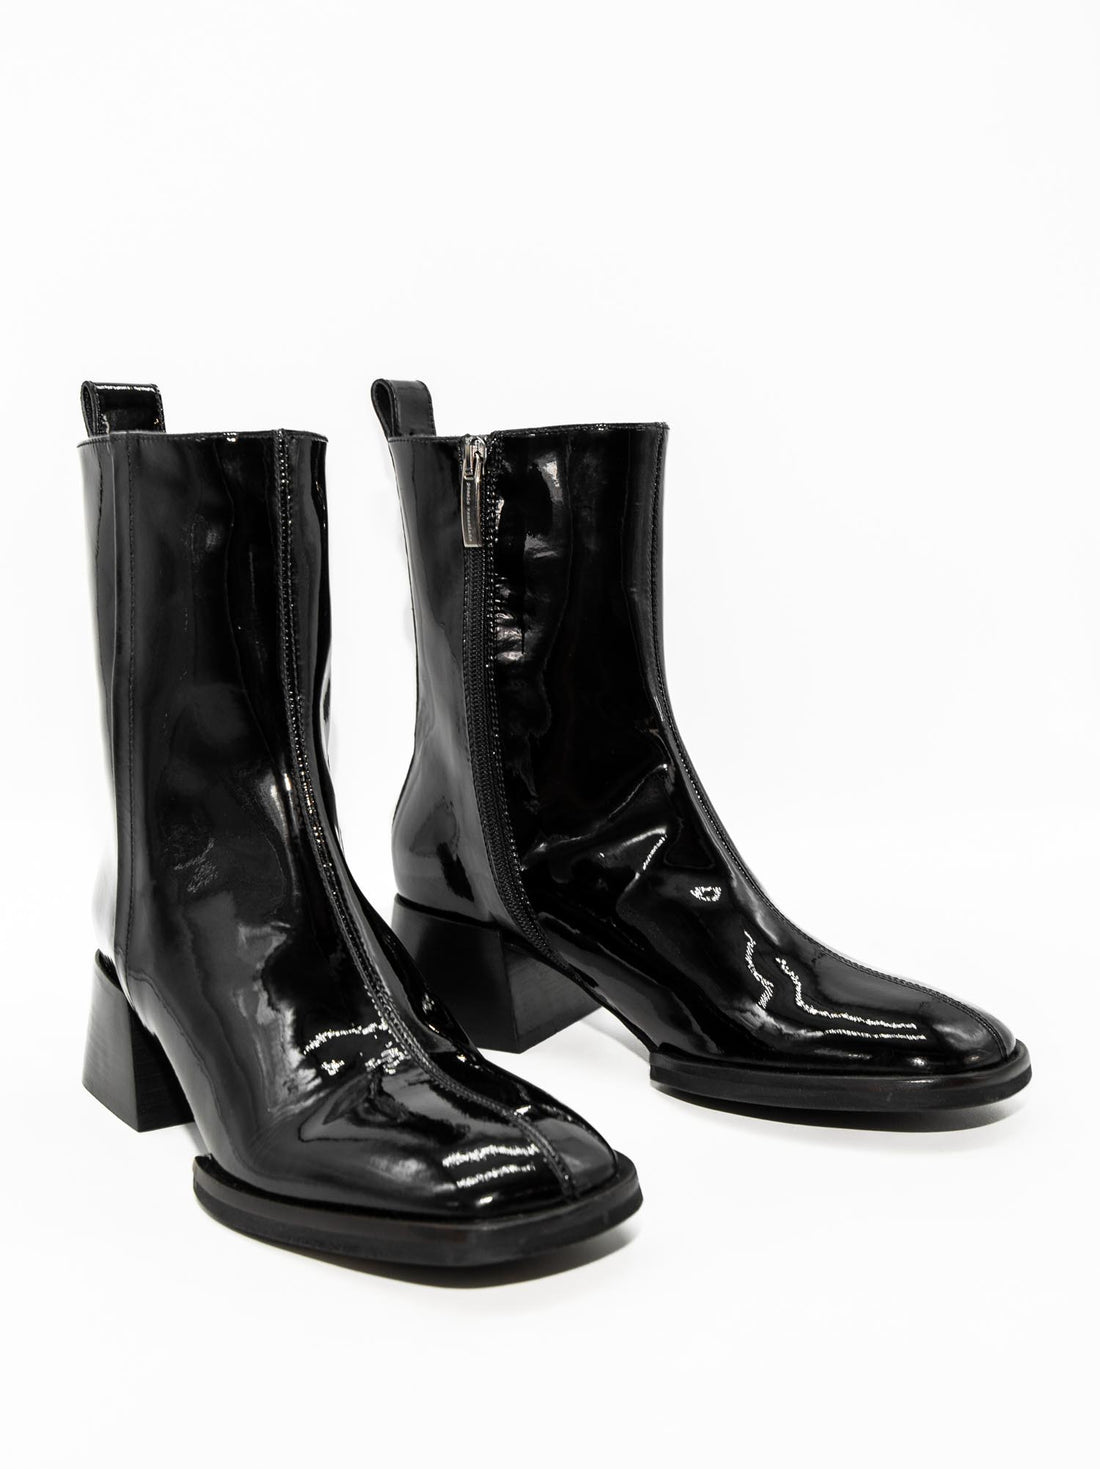 MISV08 PATENT LEATHER HEEL ANKLE BOOTS